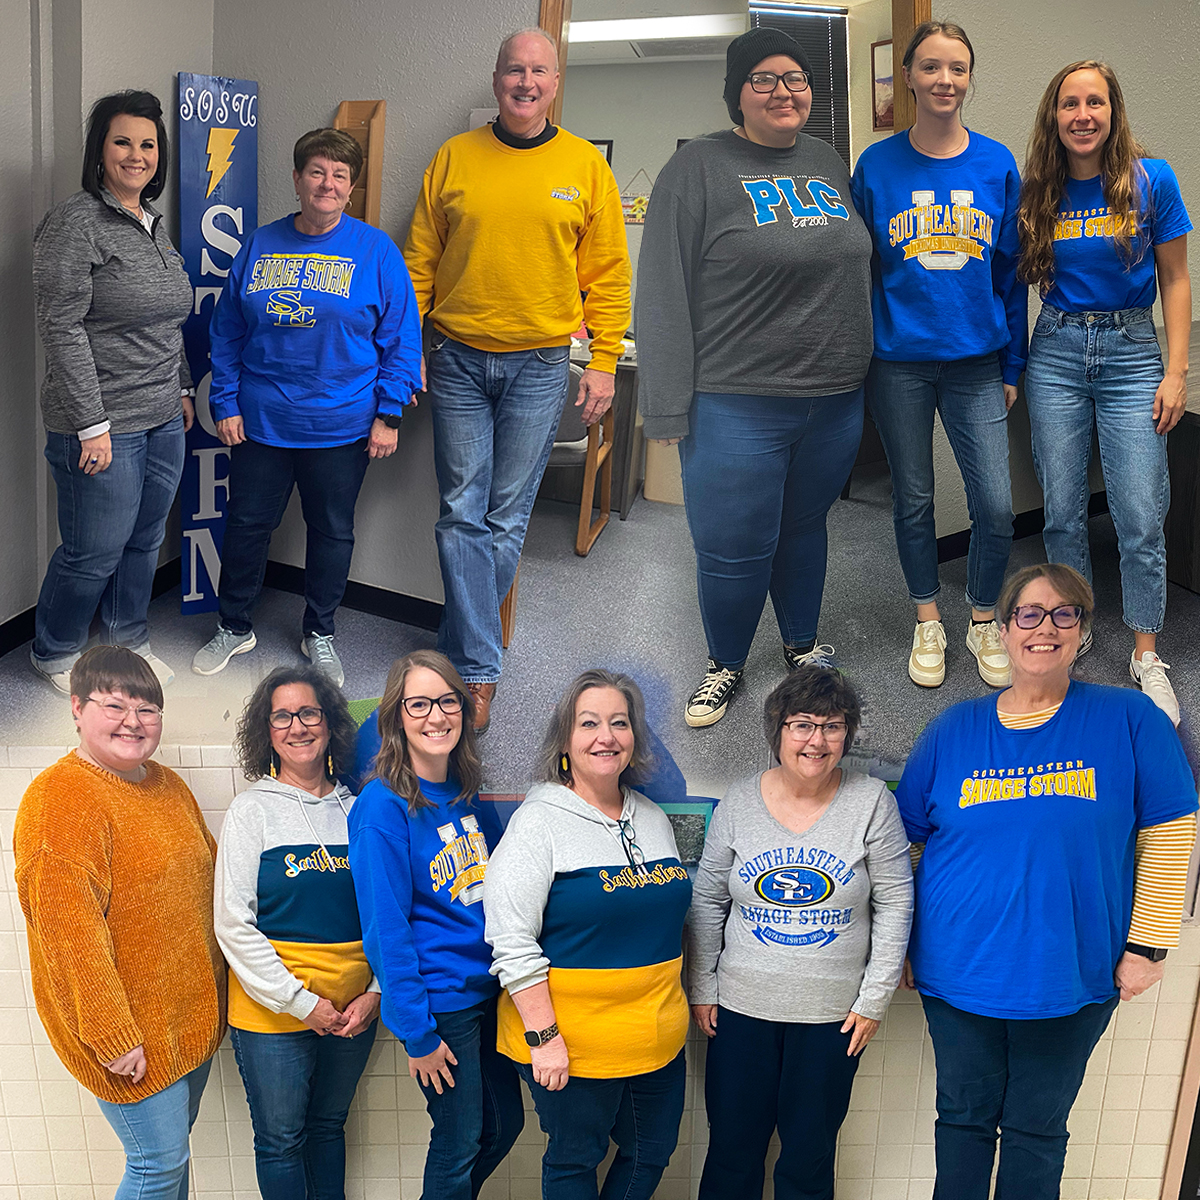 Tomorrow, we're BACK with True Blue Friday! Show us the best 🔵TRUE BLUE GROUP🔵 pic you can get! Wear blue and show your #SETrueBlue Spirit with friends! Post It on social media using #SETrueBlue or send it to jballew@se.edu for a chance to win a prize! #TrueBlueFriday